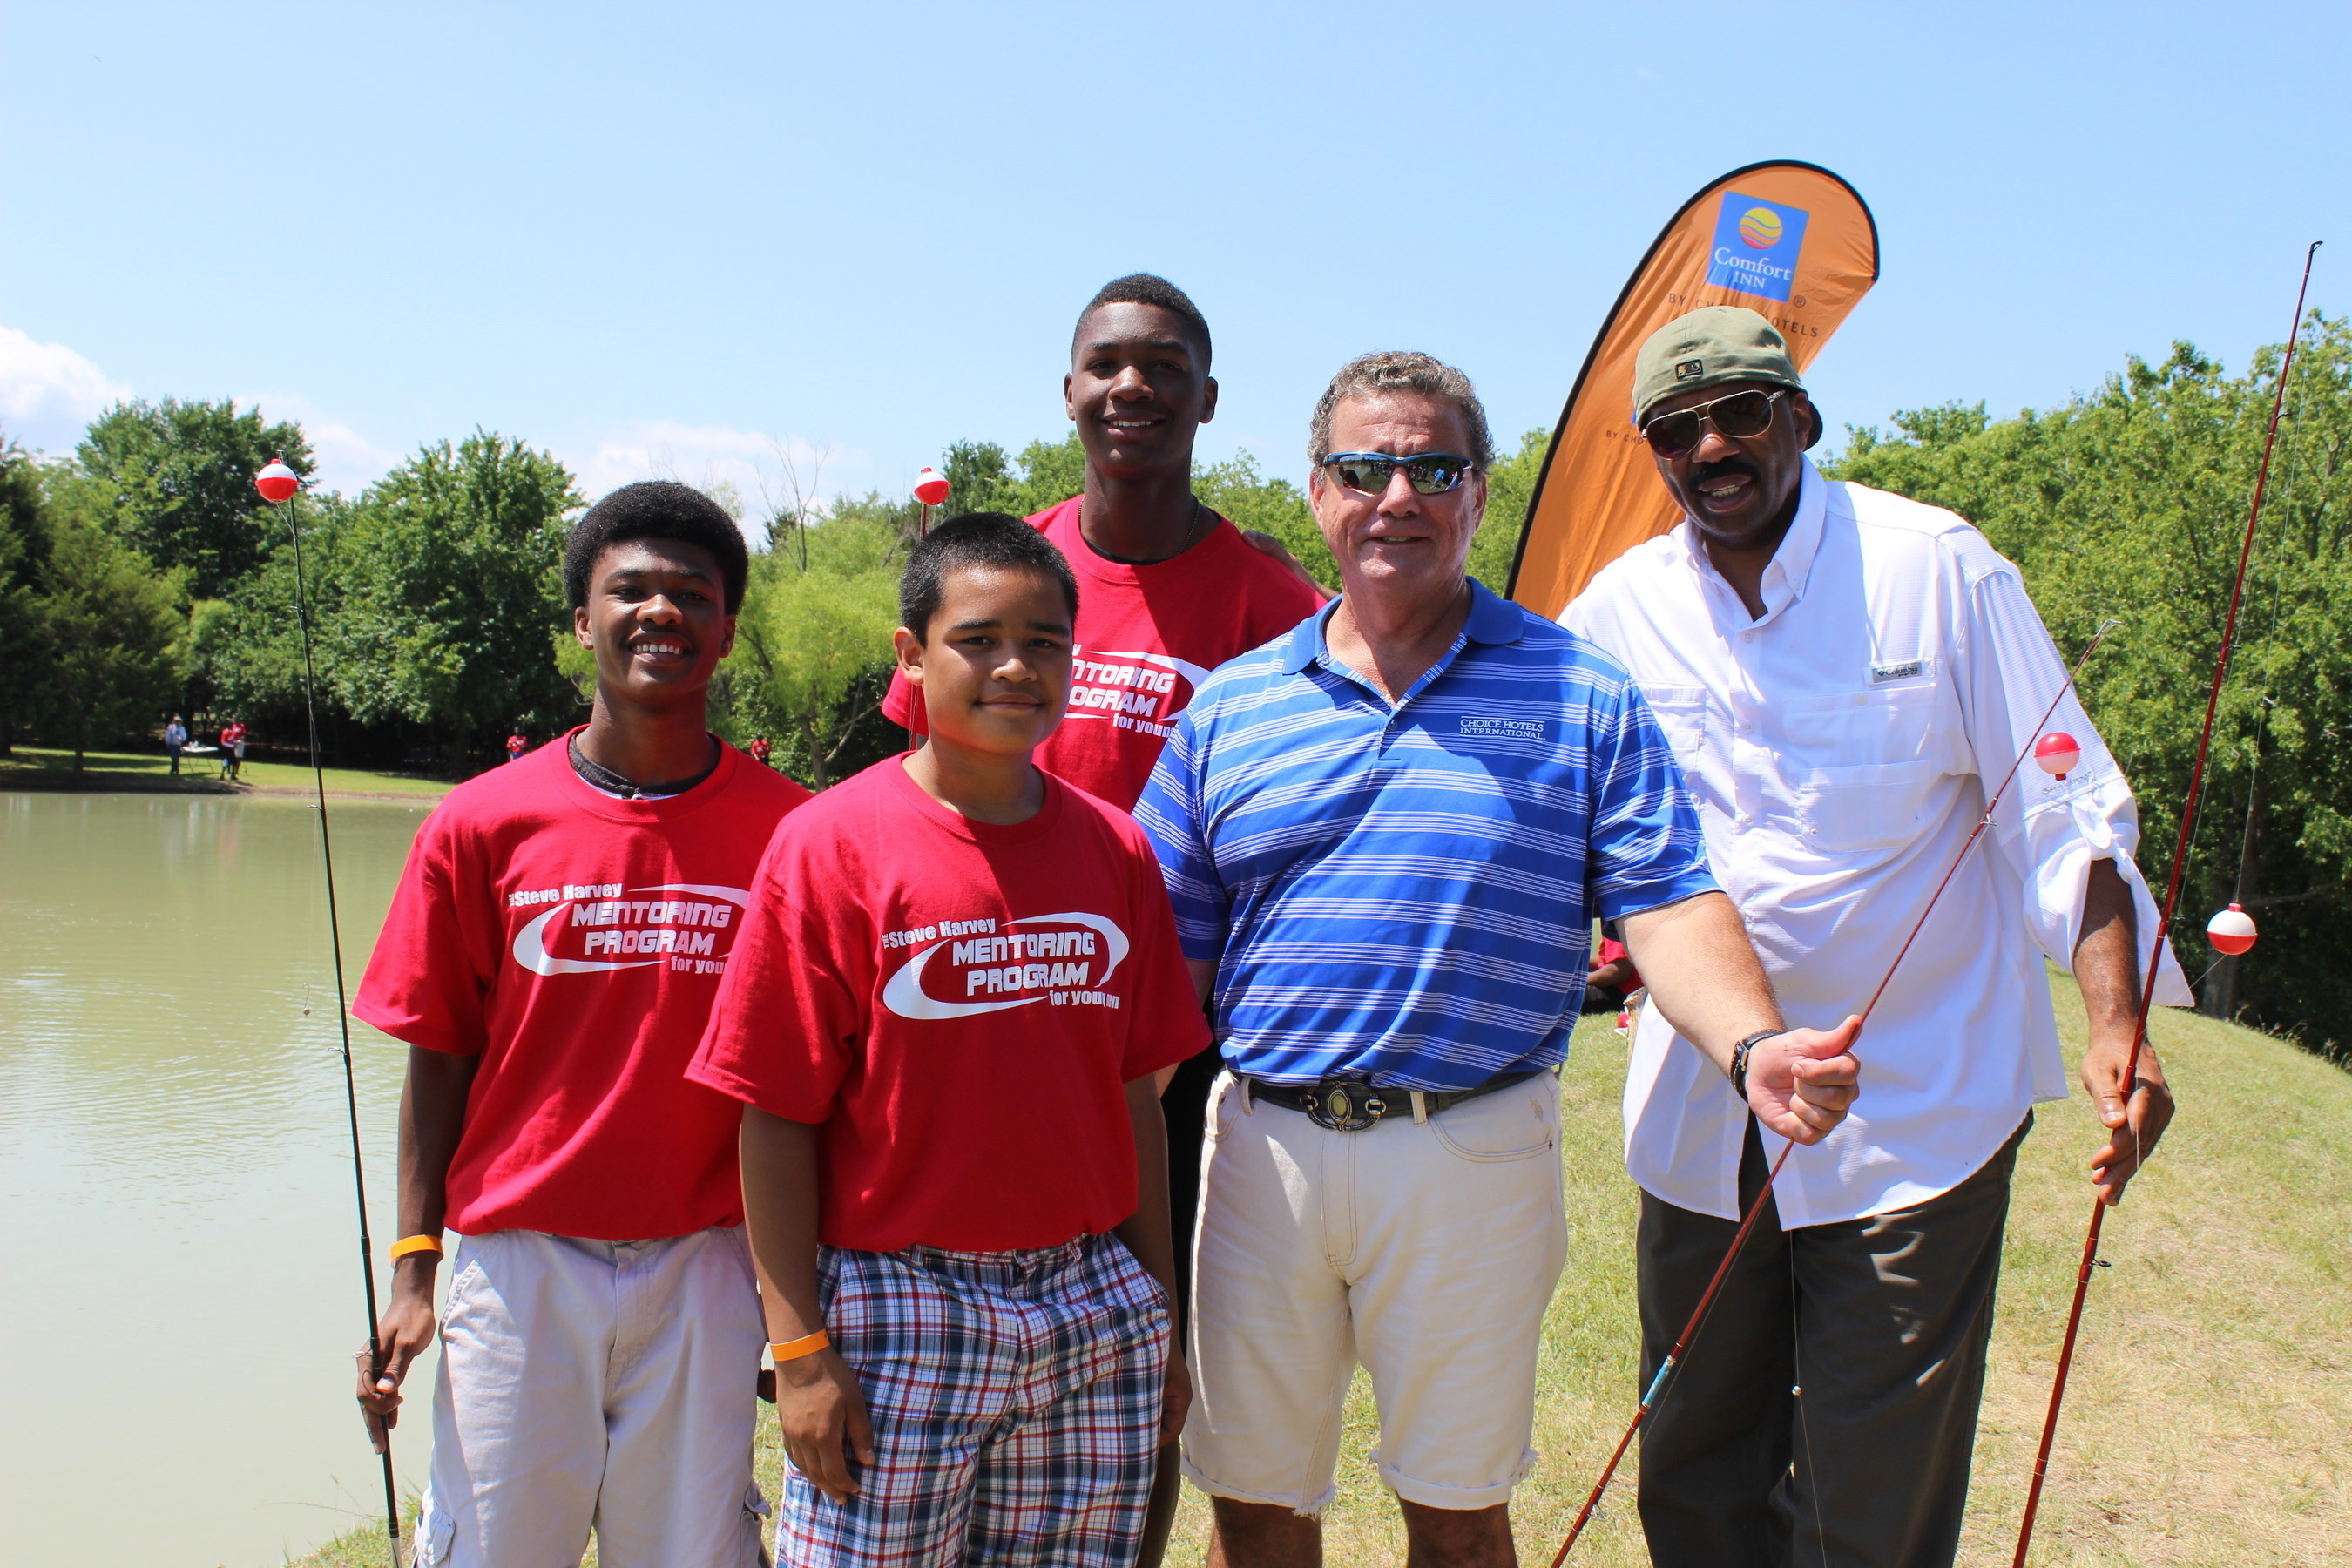 Choice Hotels President and CEO Steve Joyce with Steve Harvey and Mentoring Camp participants